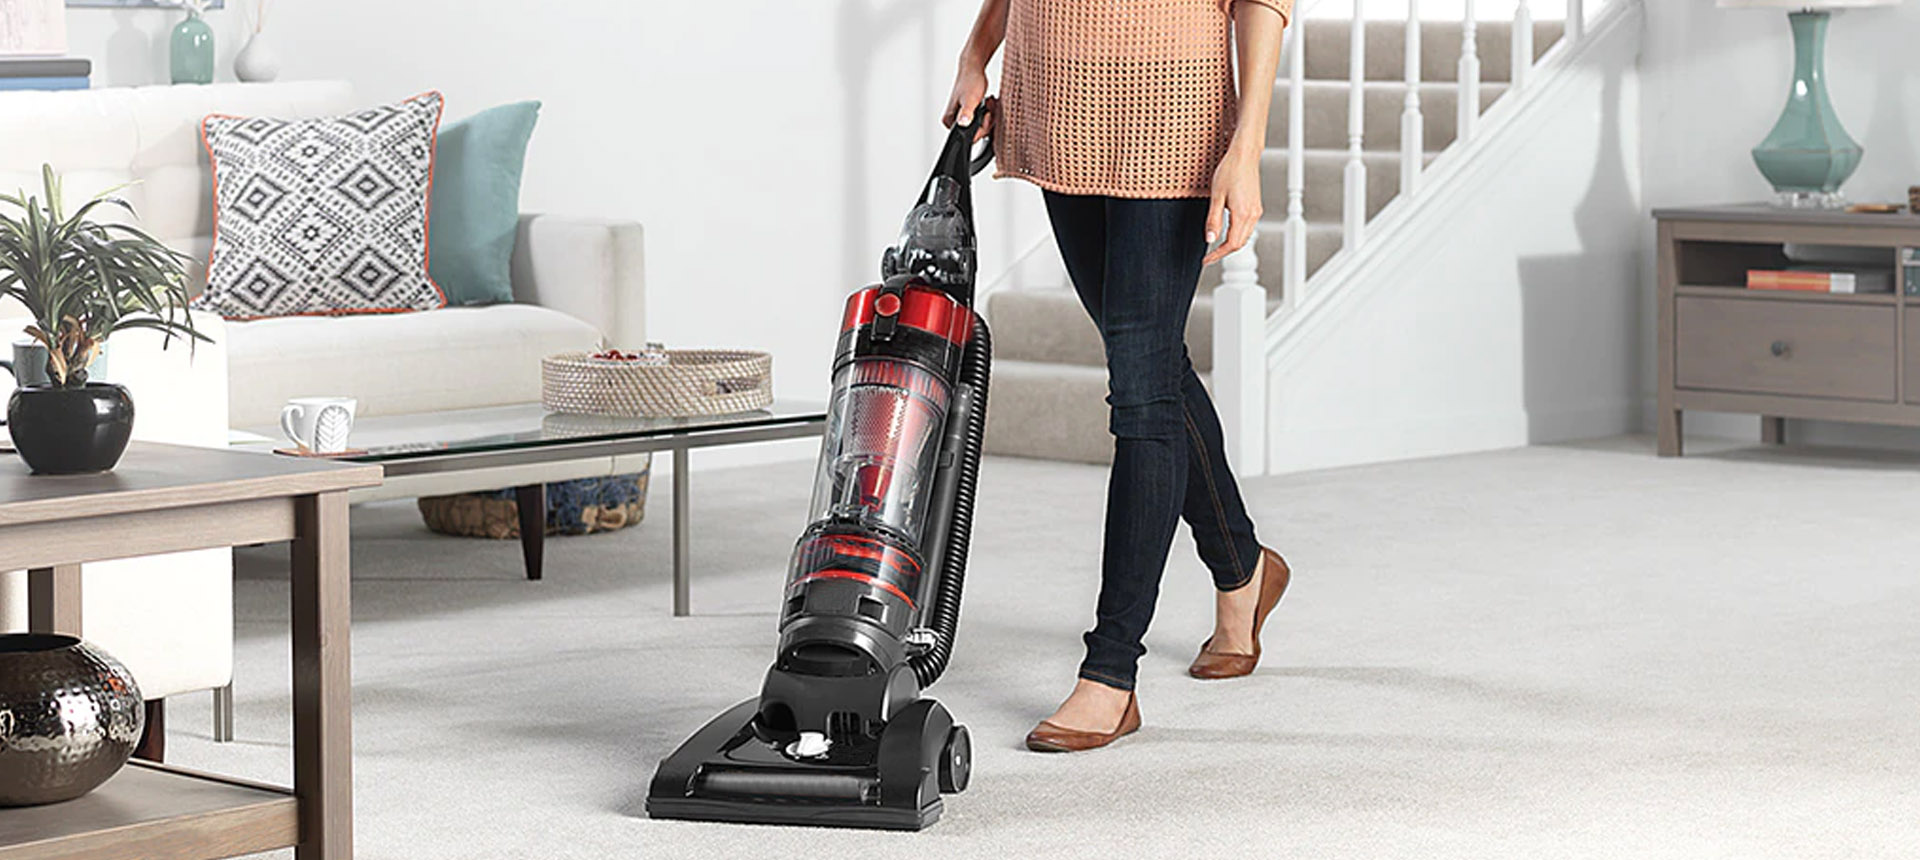 Use Vacuum Cleaners Properly-2